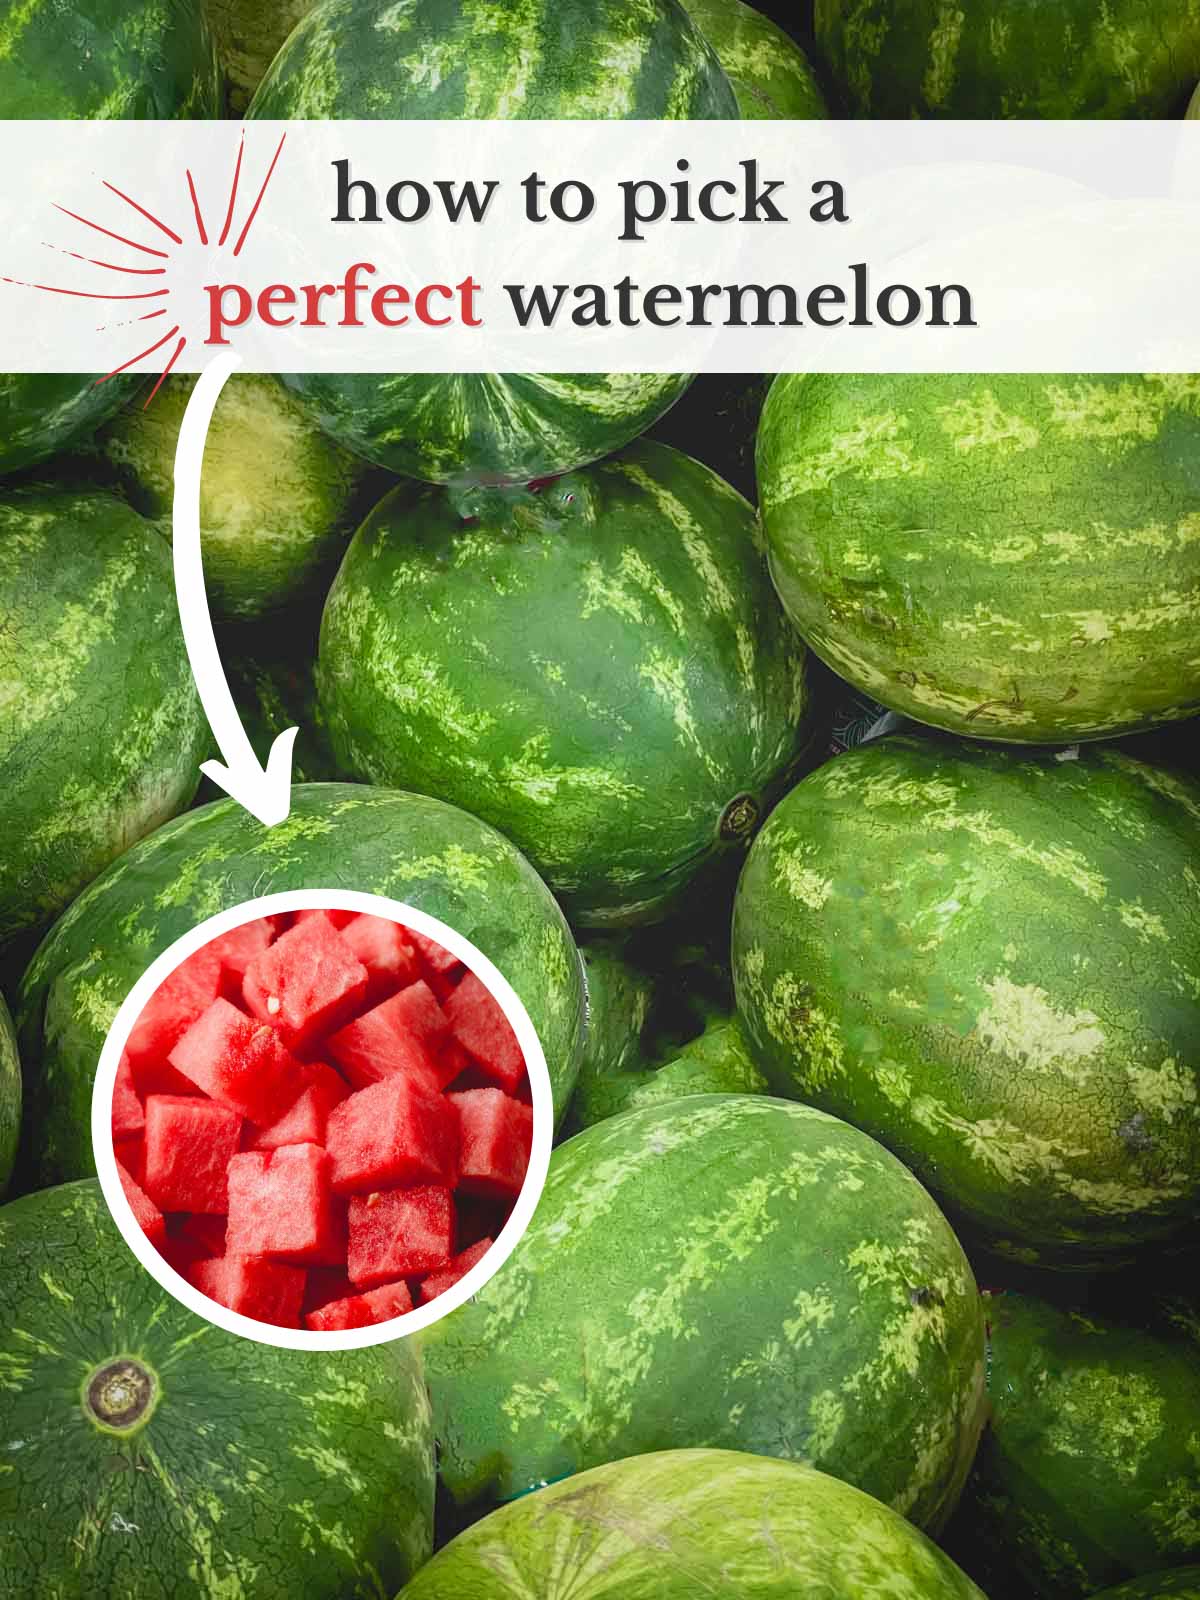 Say Goodbye To Disappointing Watermelons: How To Pick The Perfect One